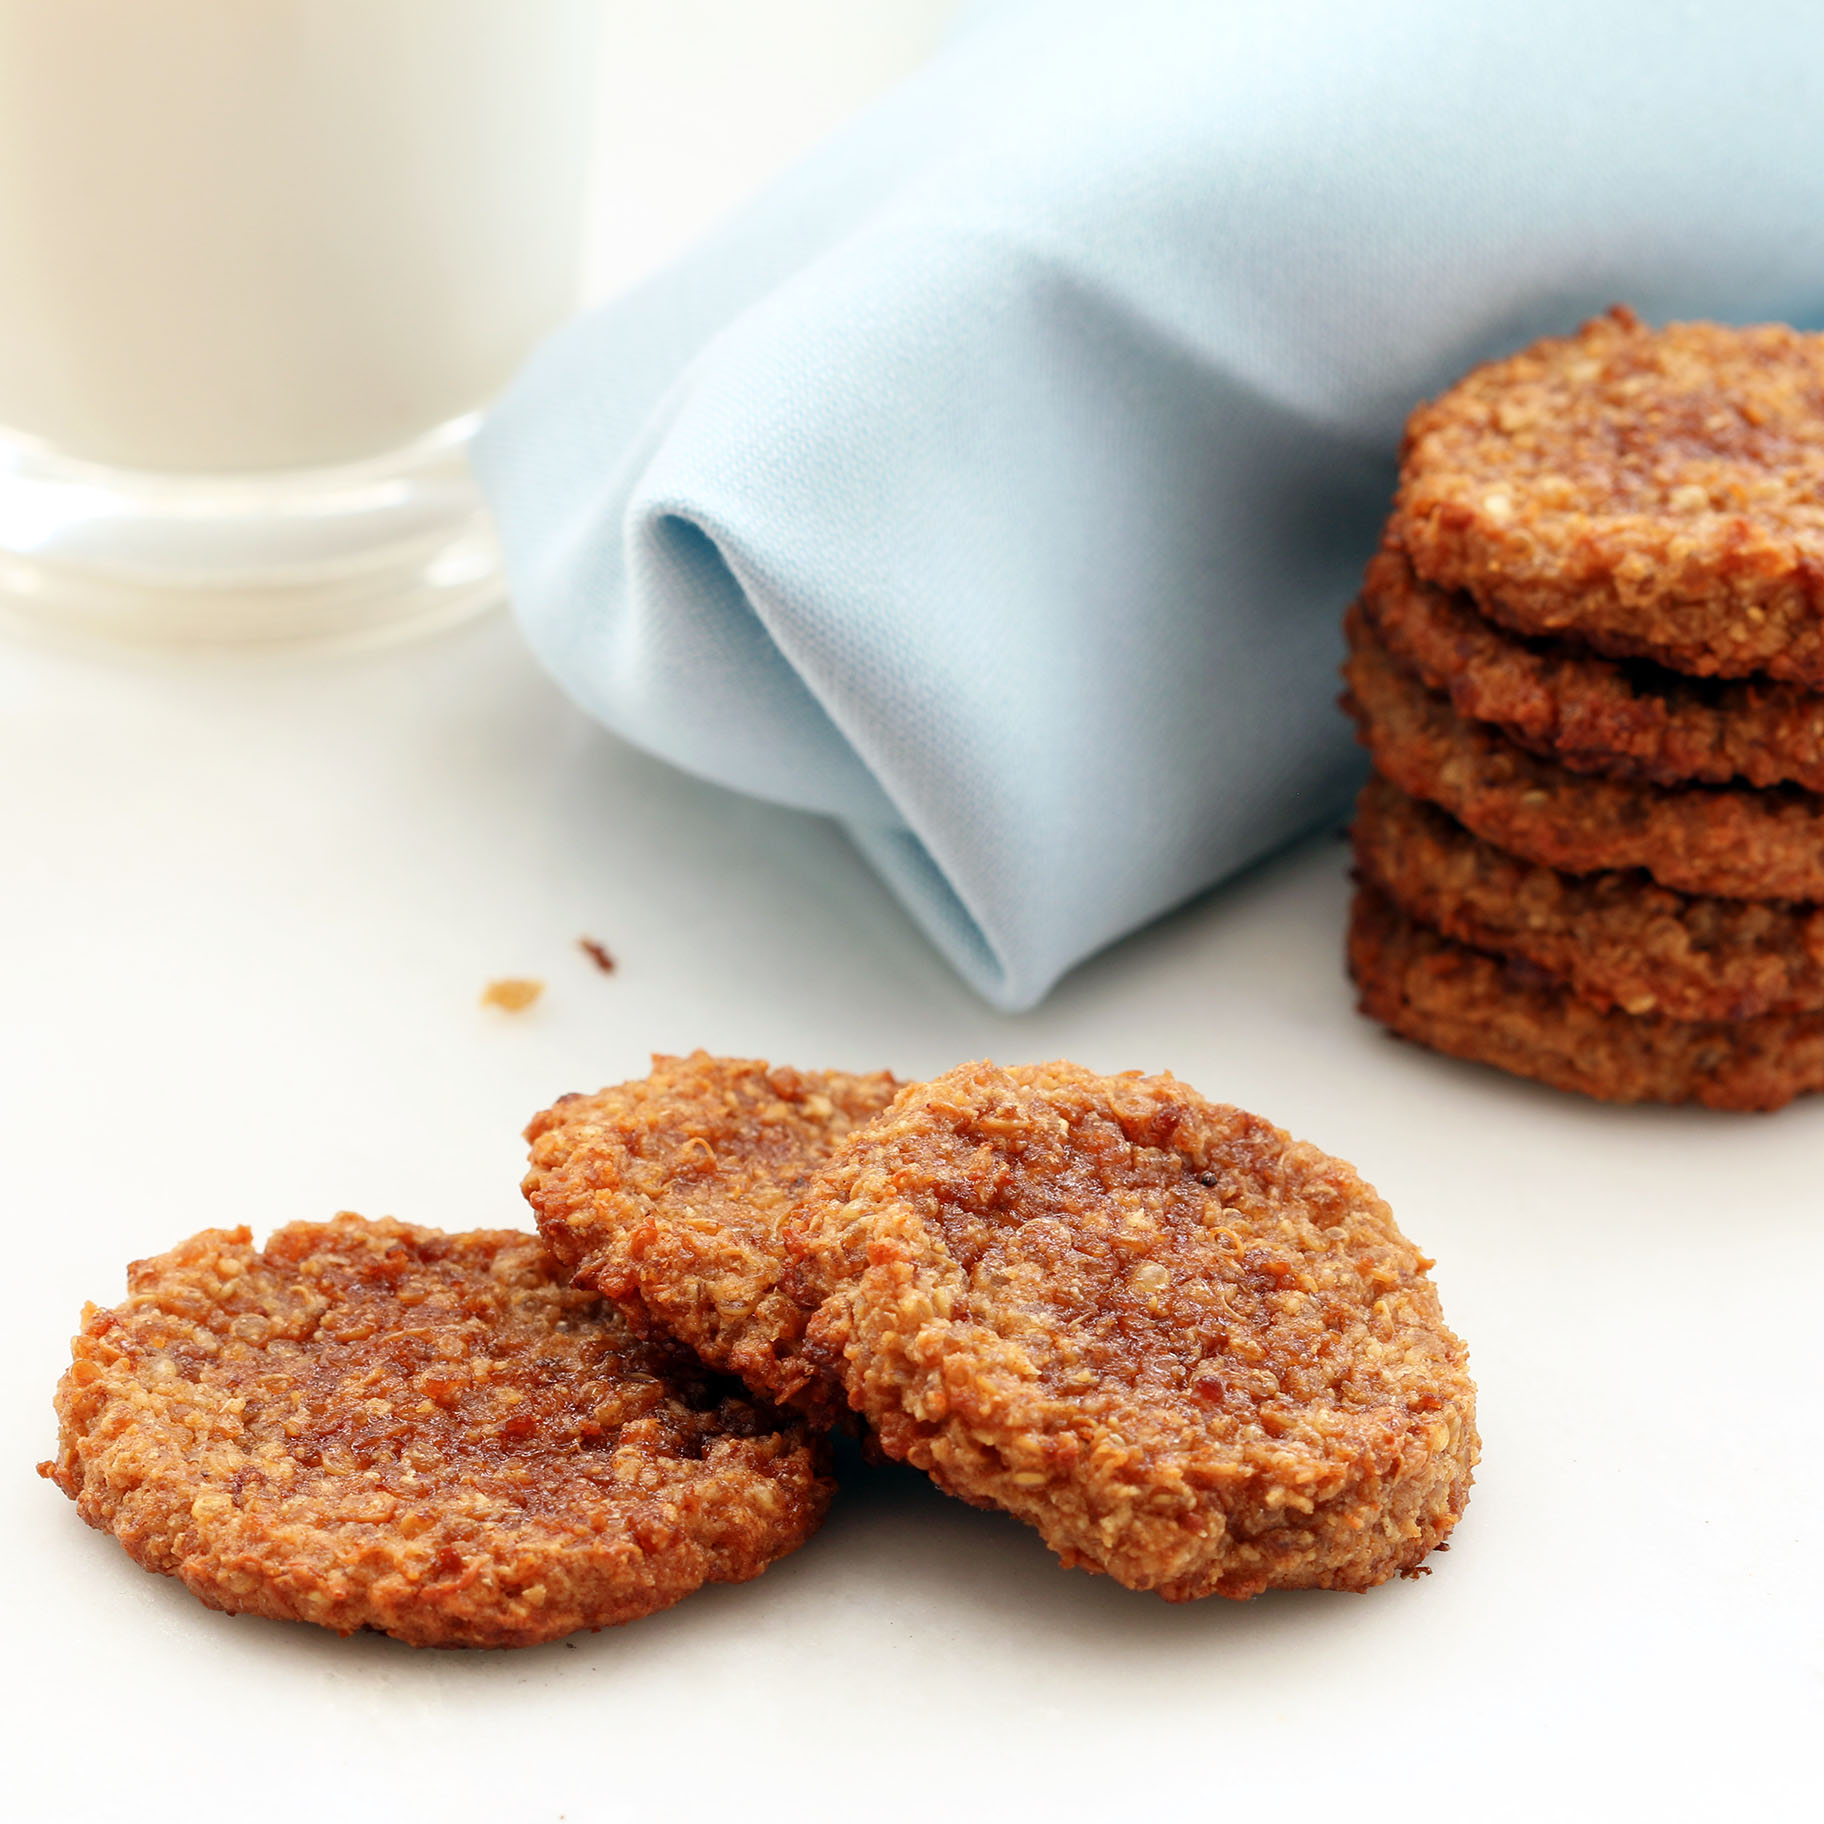 30 Healthy Ways to Enjoy a Snickerdoodle Cookie